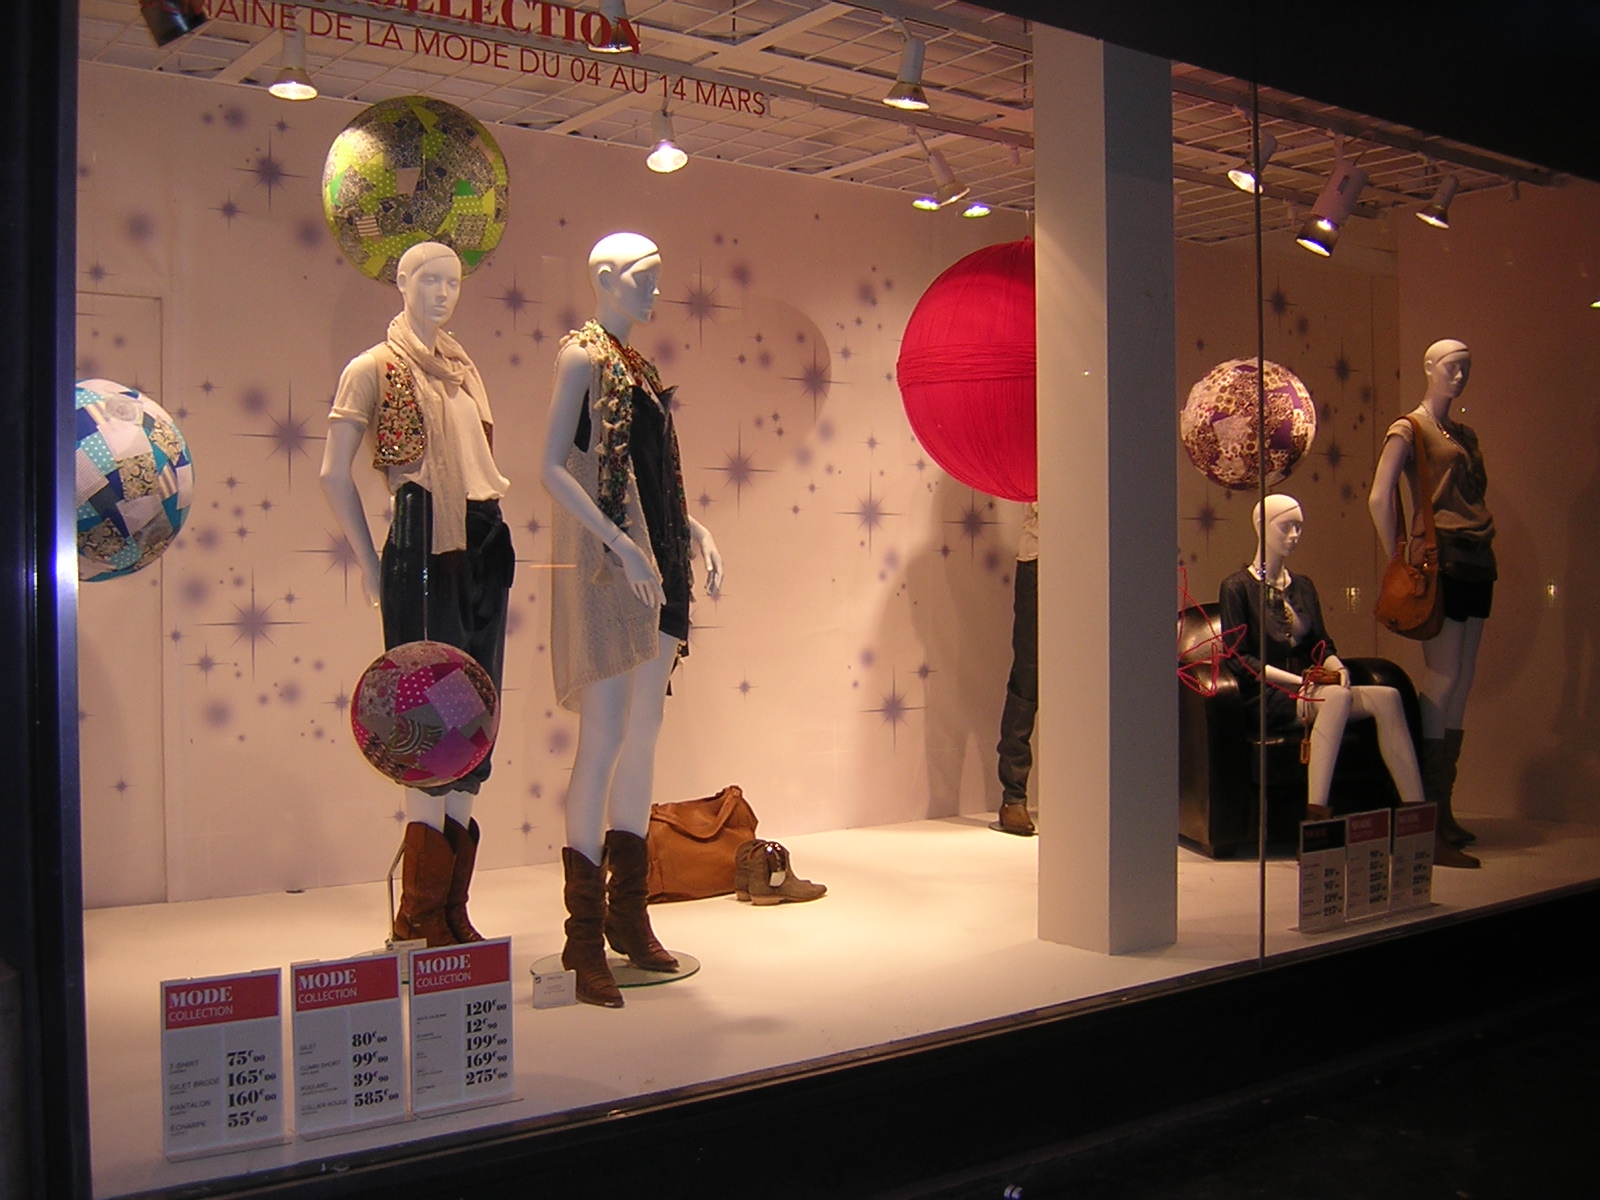 Store Windows in Paris: Mode Collection